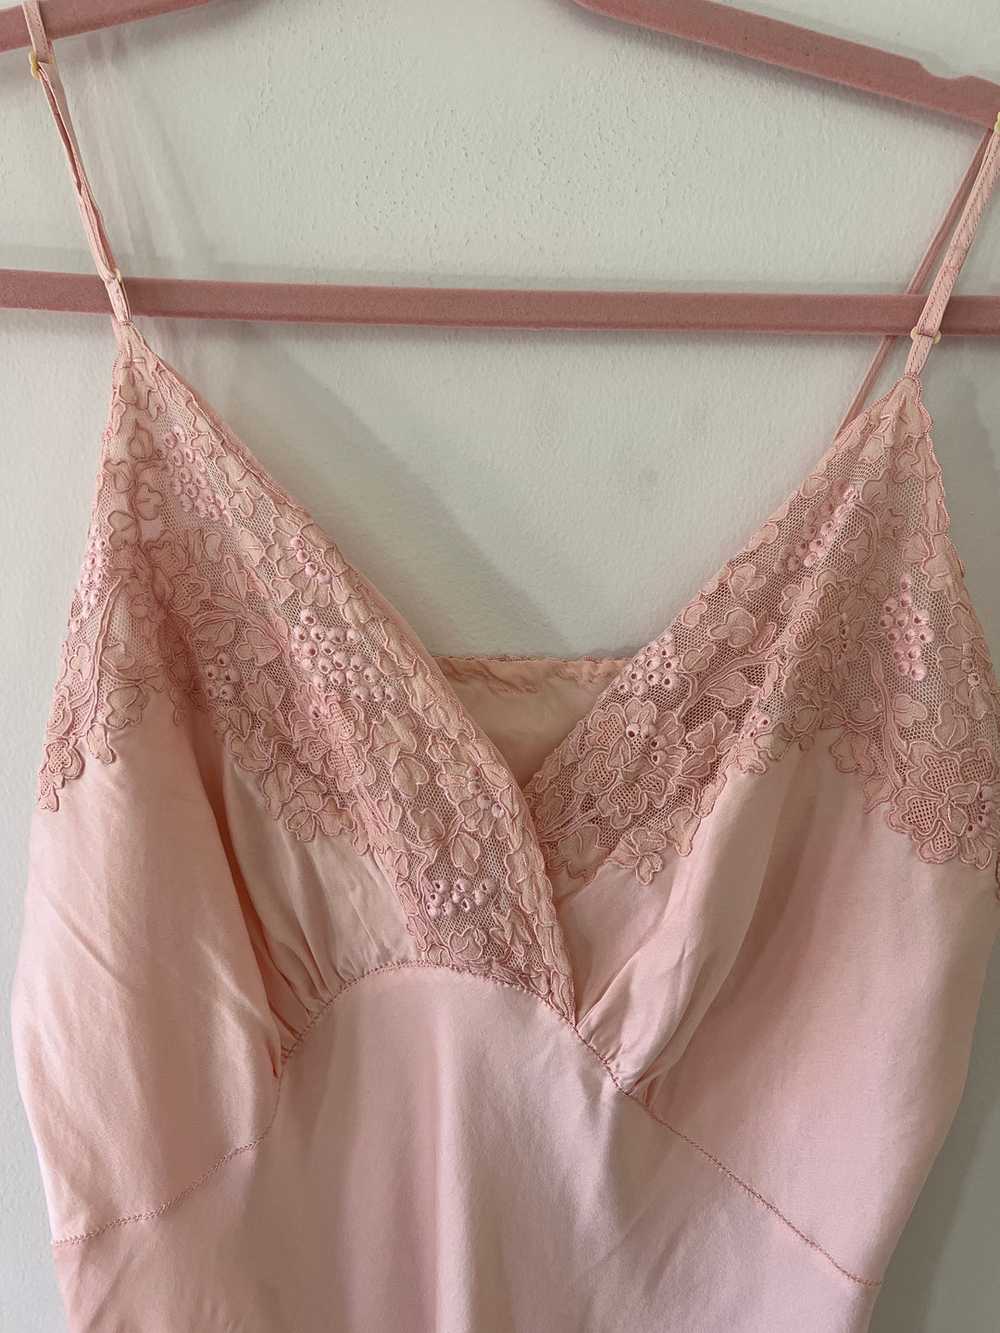 1930's Pink Silk Slip Dress with Embroidery - image 2